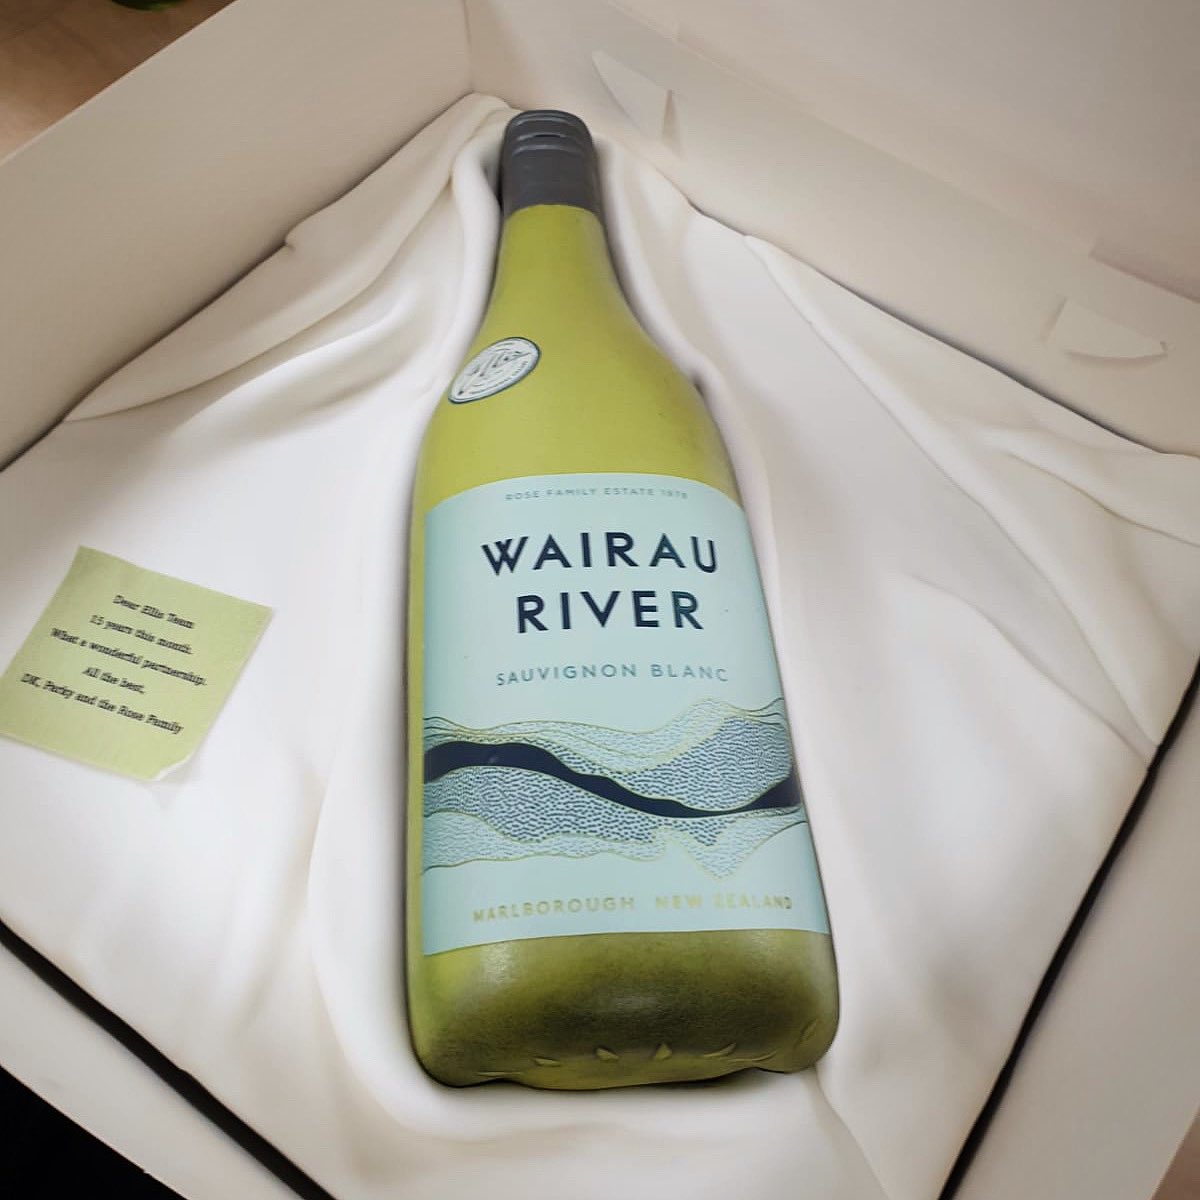 What better way to celebrate Friday, than with cake (and wine)?! Thanks to our wonderful friends @wairauriver for sending us this amazing cake to celebrate a perfect partnership of 15 years 💓 
#cake #friyay #wine #newzealandwine #marlborough #wine #familybusiness #family #gift